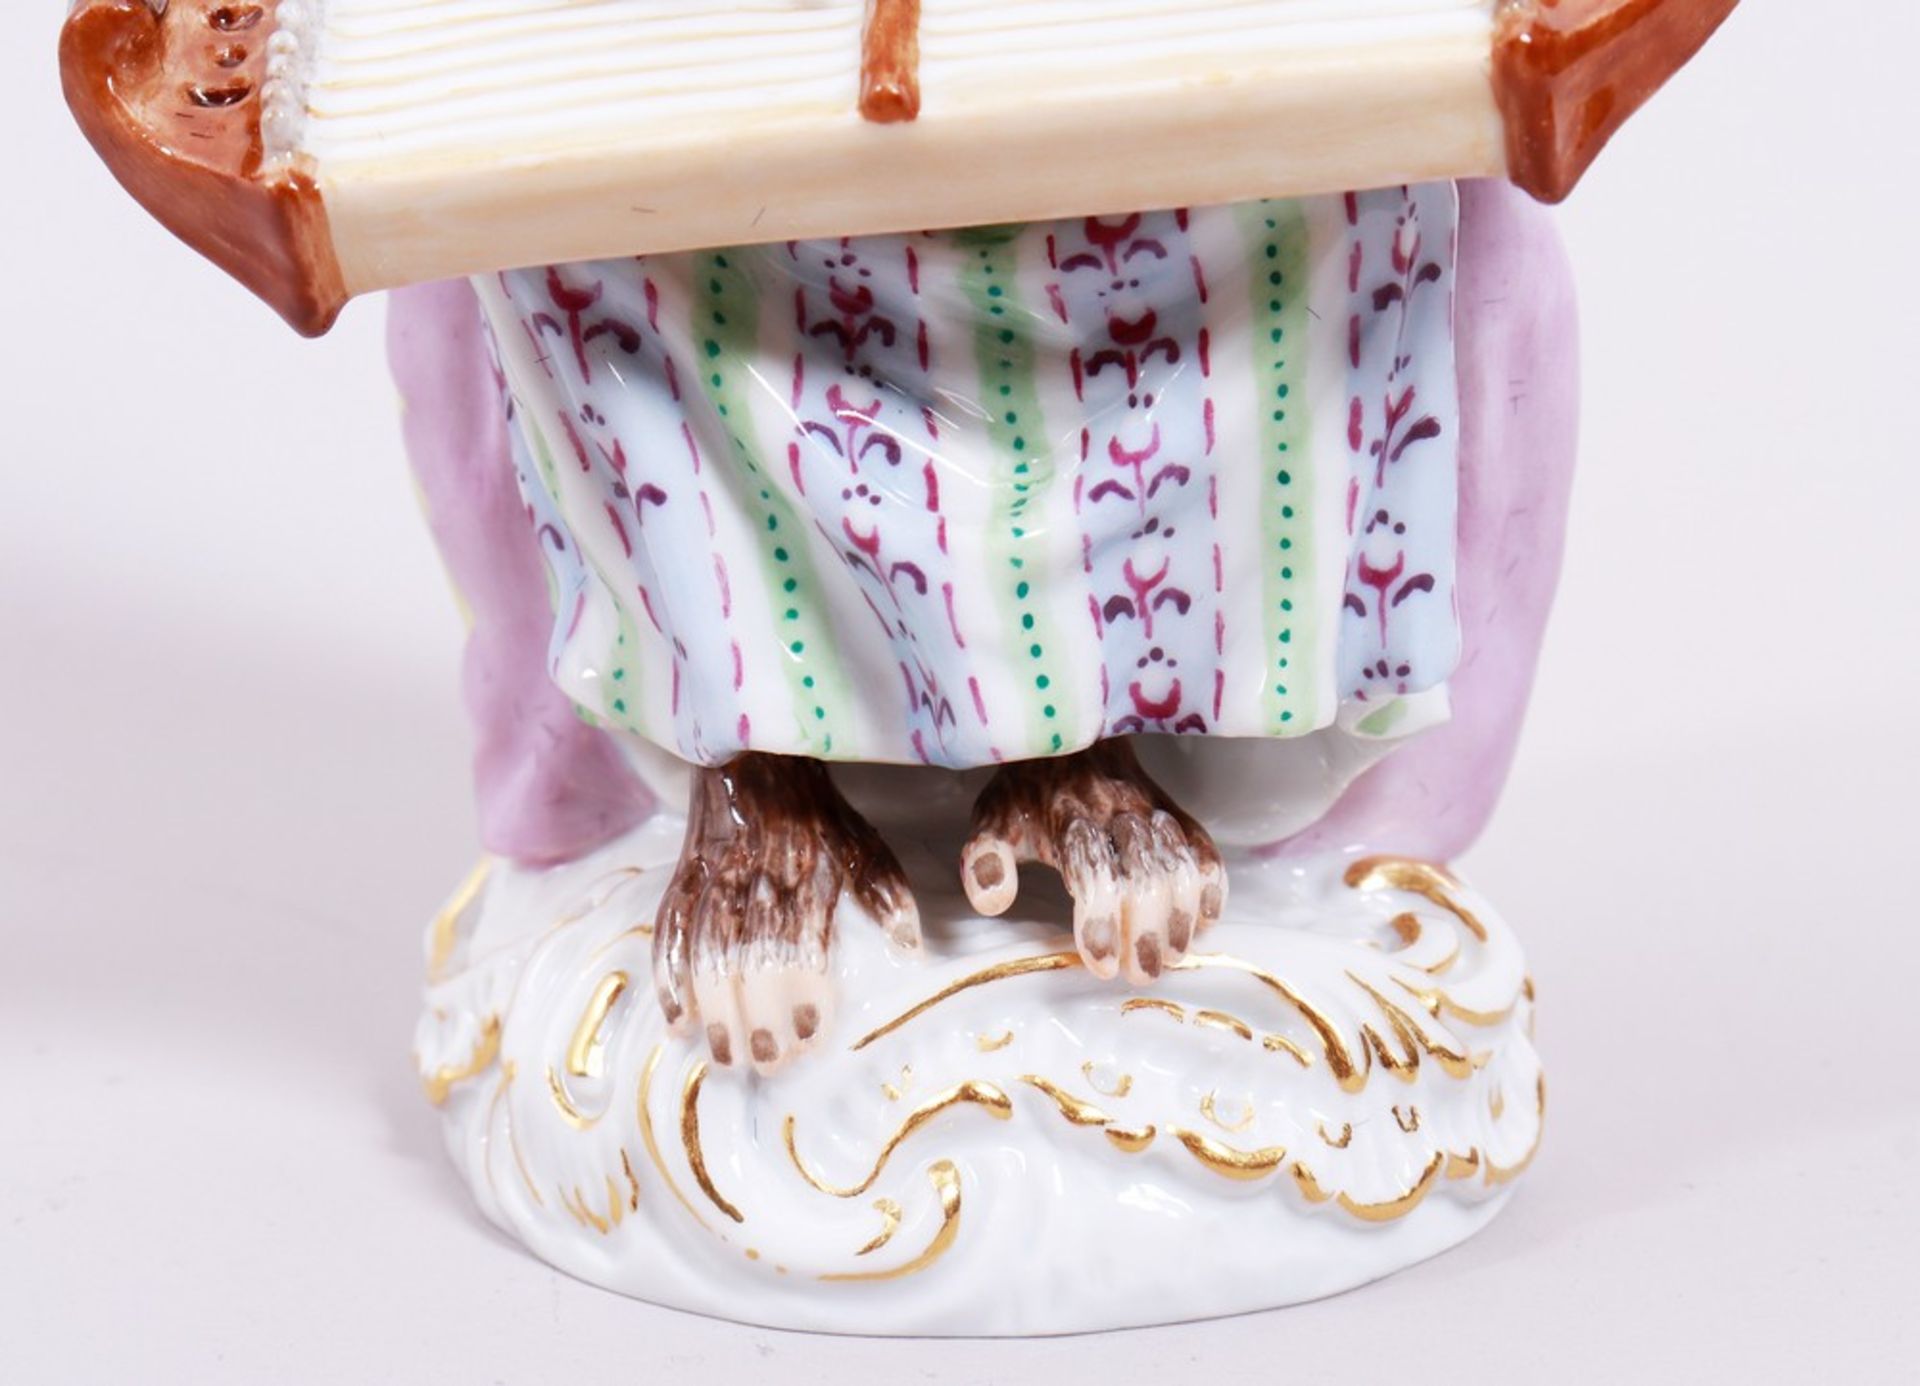 "Monkey with zither" for the "Affenkapelle", design 2019 by Silke Ebermann for Meissen, limited edi - Image 6 of 12